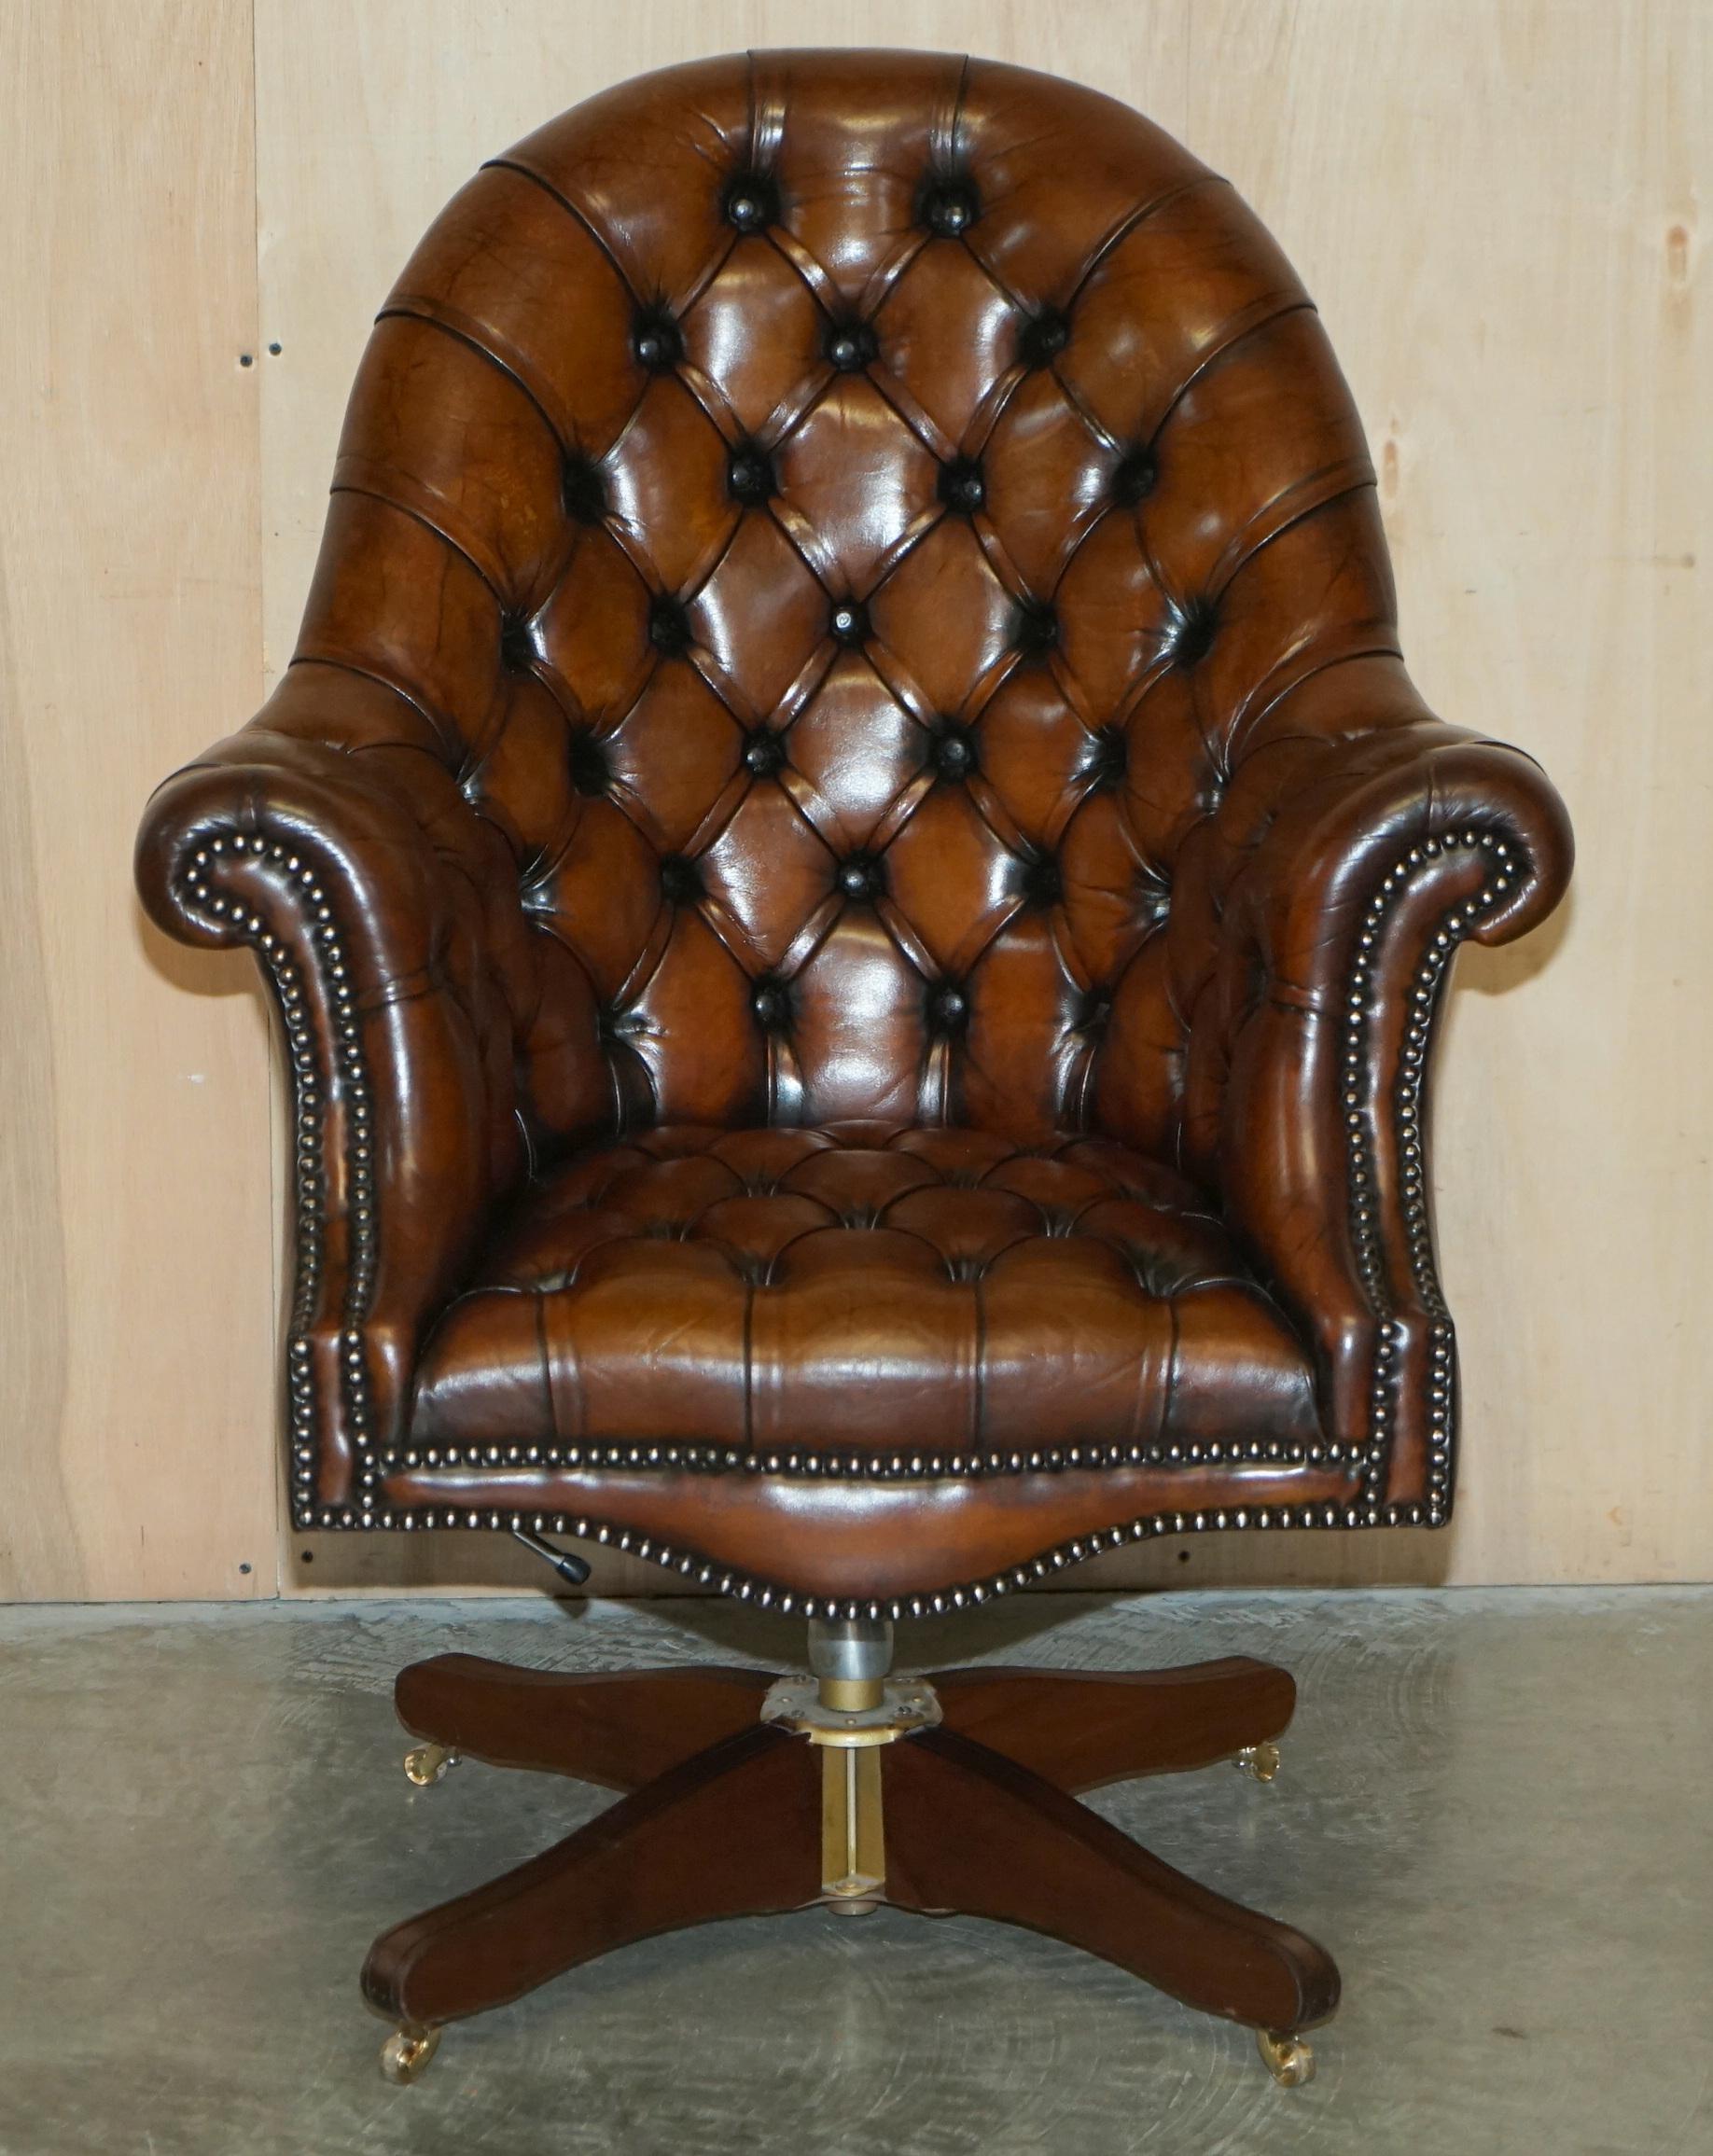 Royal House Antiques

Royal House Antiques is delighted to offer for sale this stunning fully restored aged brown leather Godfather Directors armchair circa 1900-1920's

Please note the delivery fee listed is just a guide, it covers within the M25